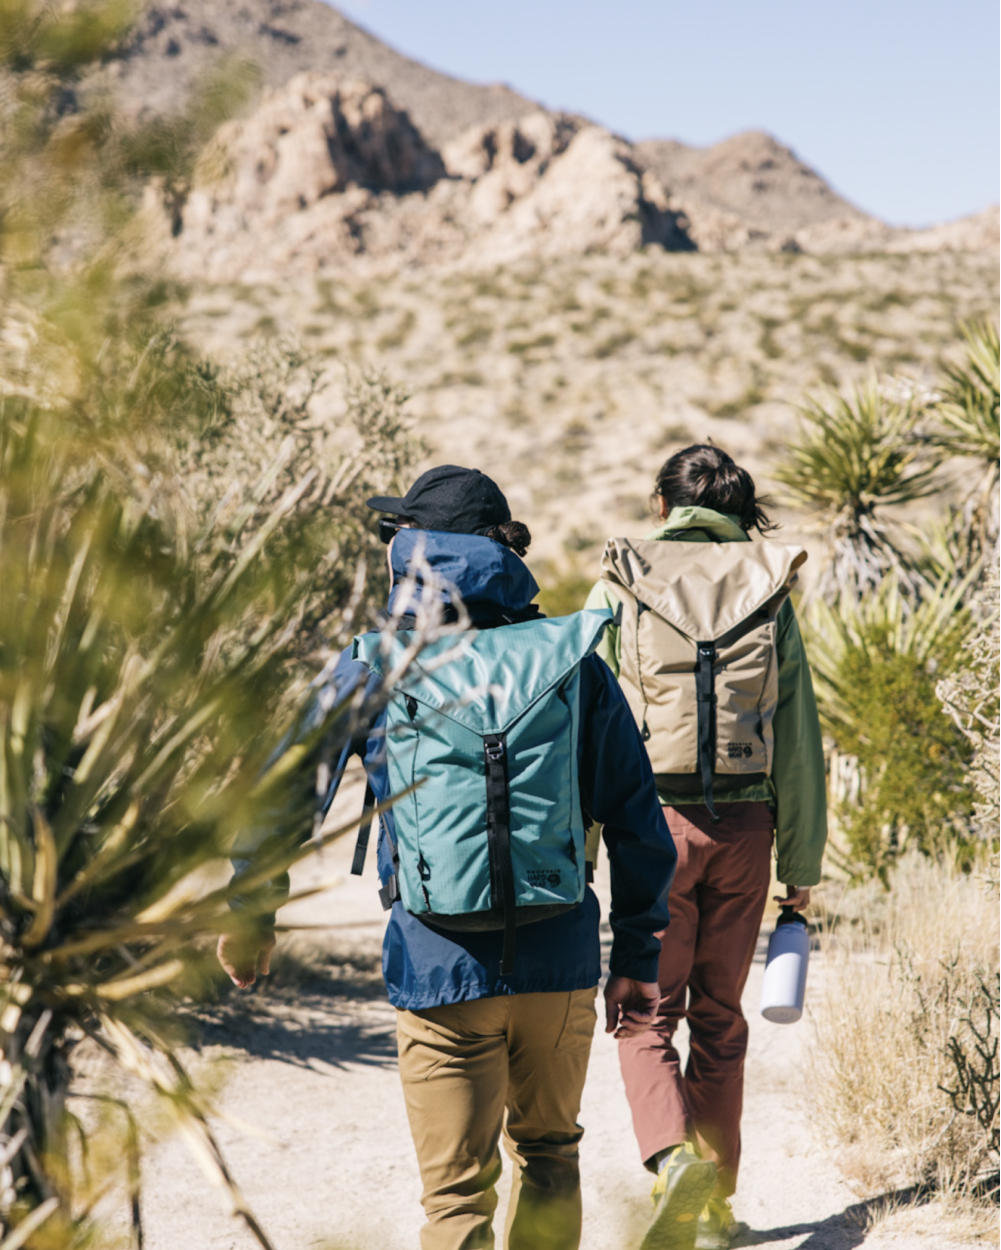 Two hikers in the desert.